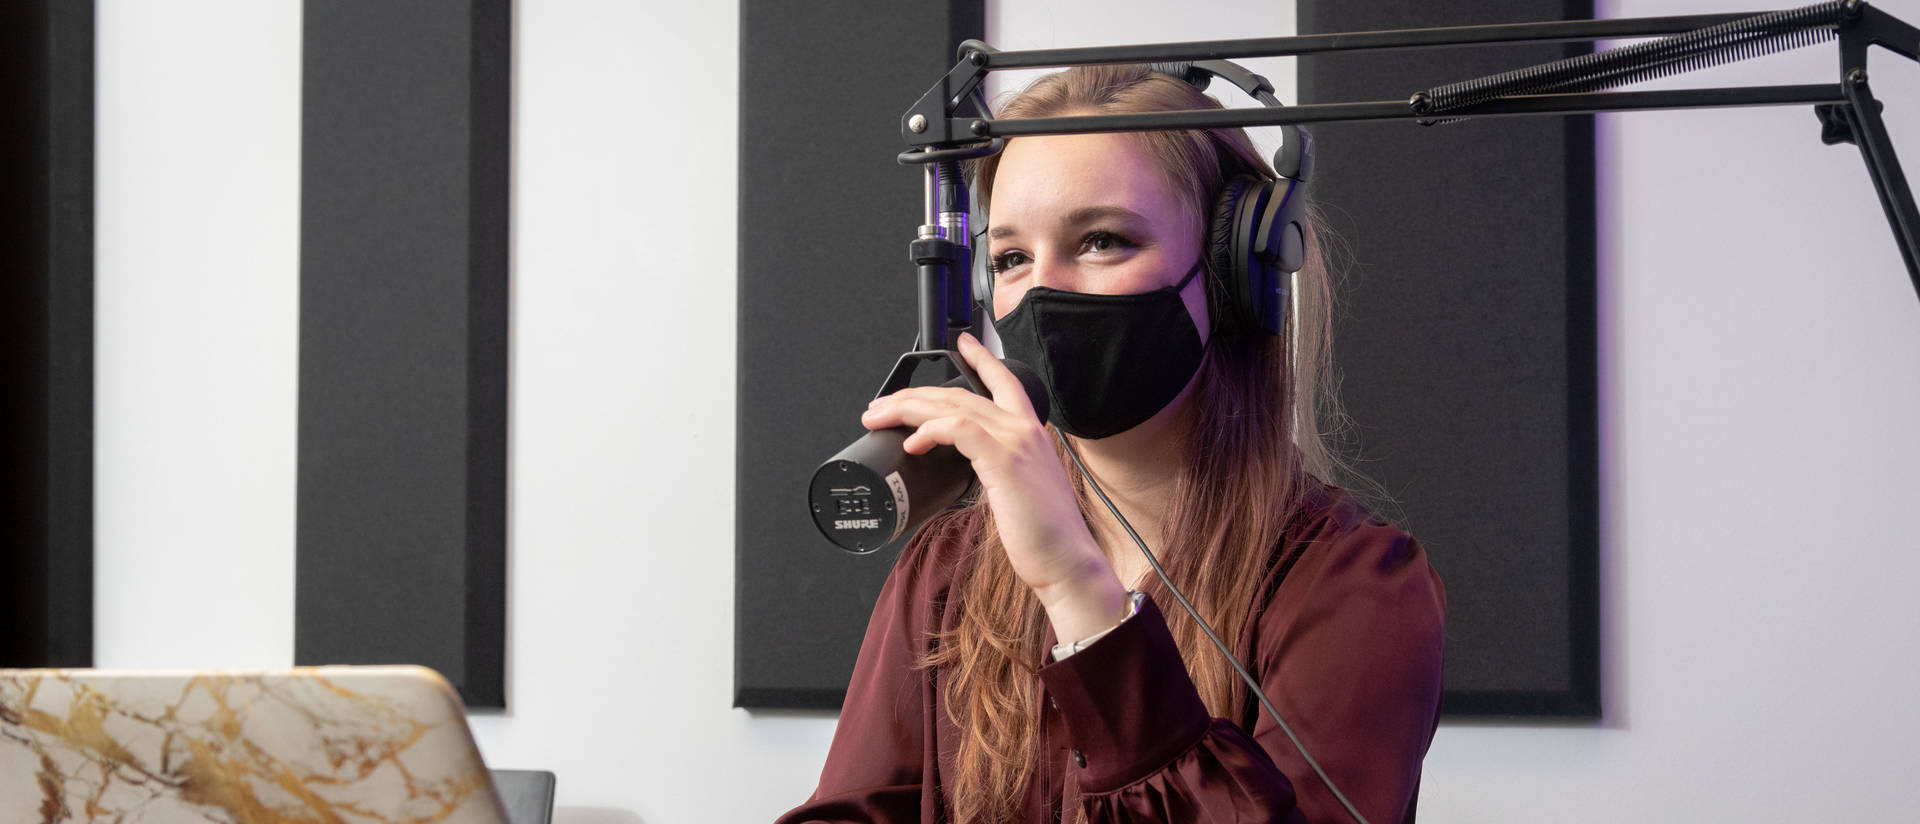 Marketing student recording a podcast